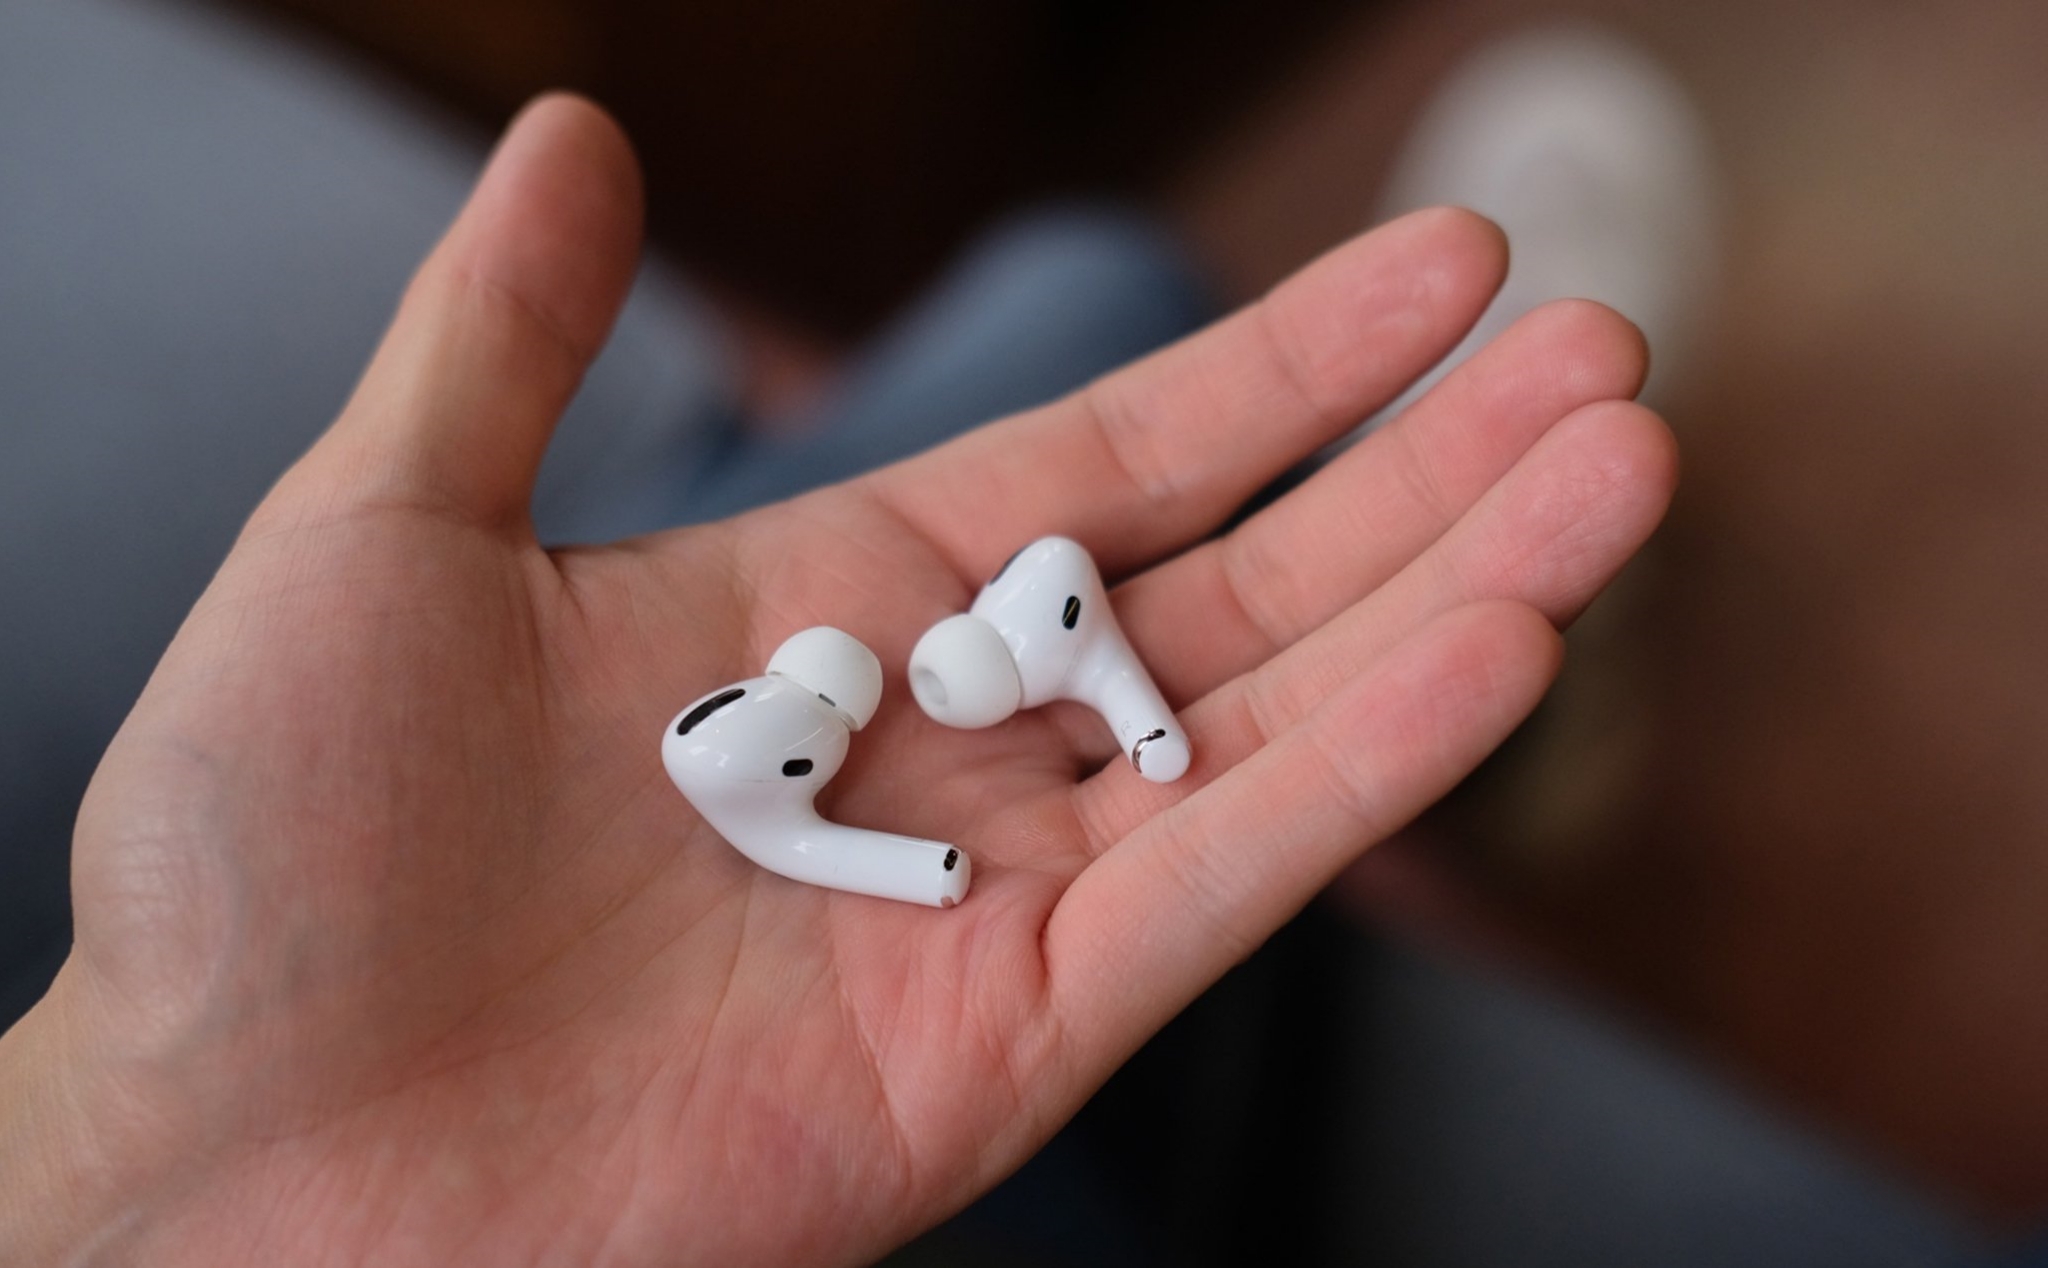 4817762_apple-airpods-pro-hands-on-1.jpg